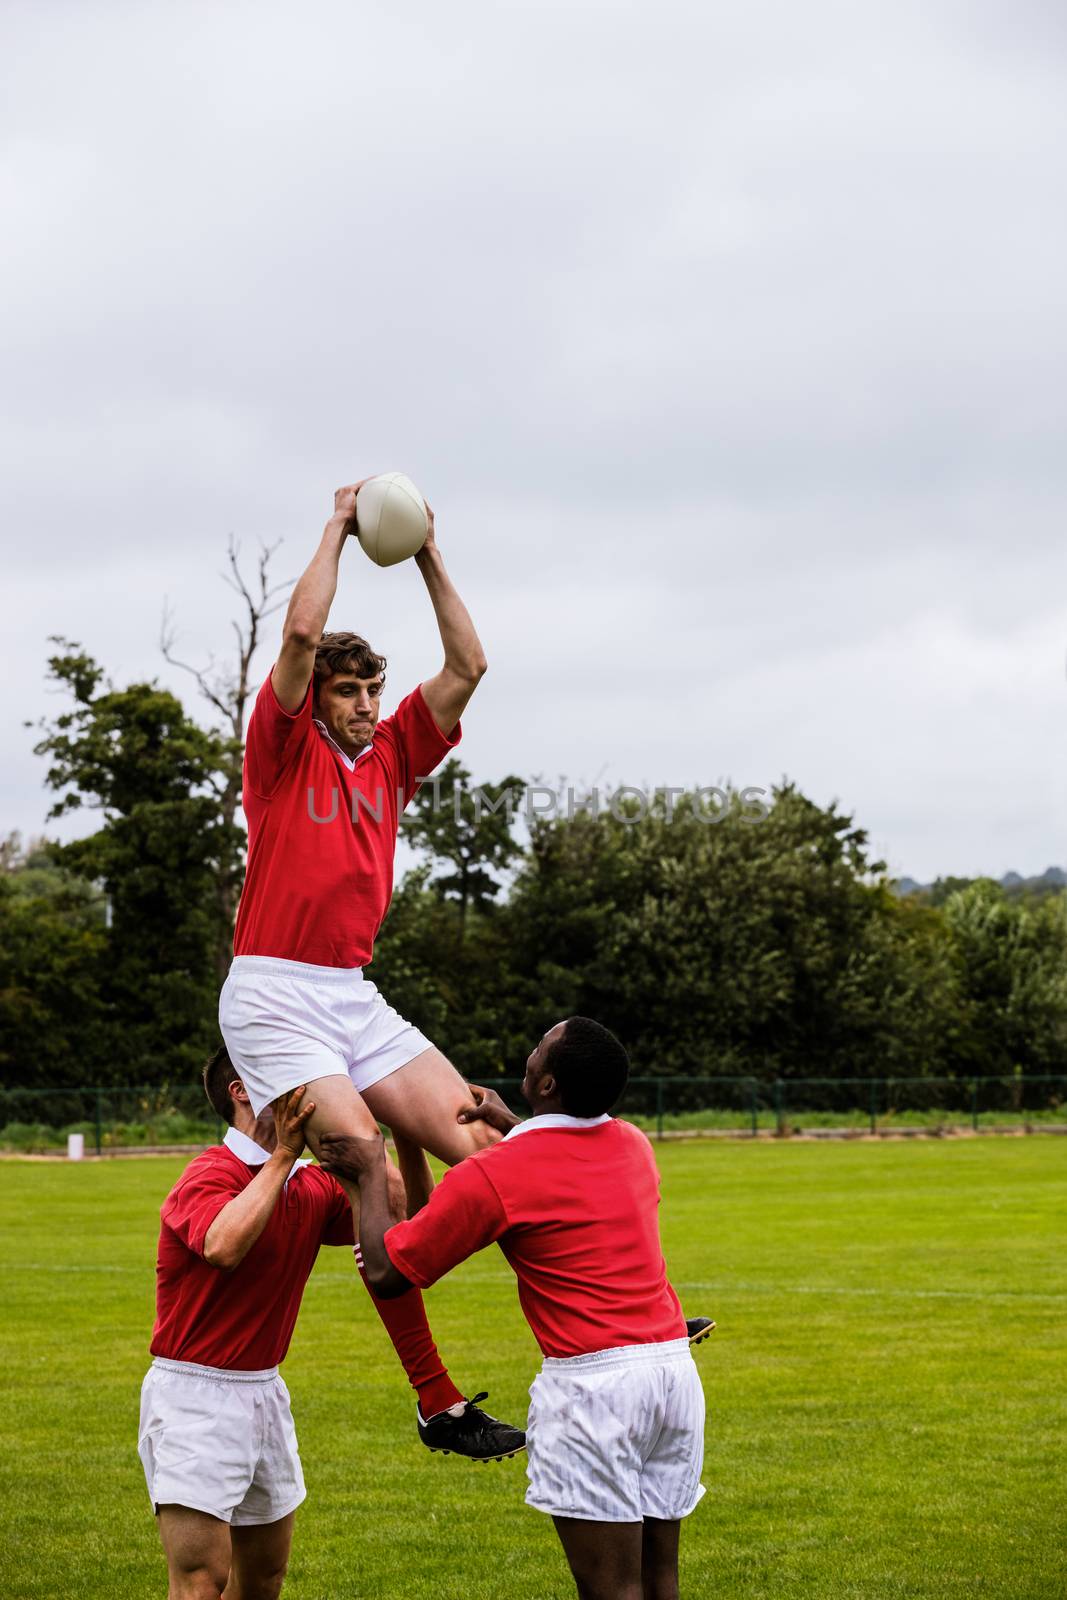 Rugby players jumping for line out at the park